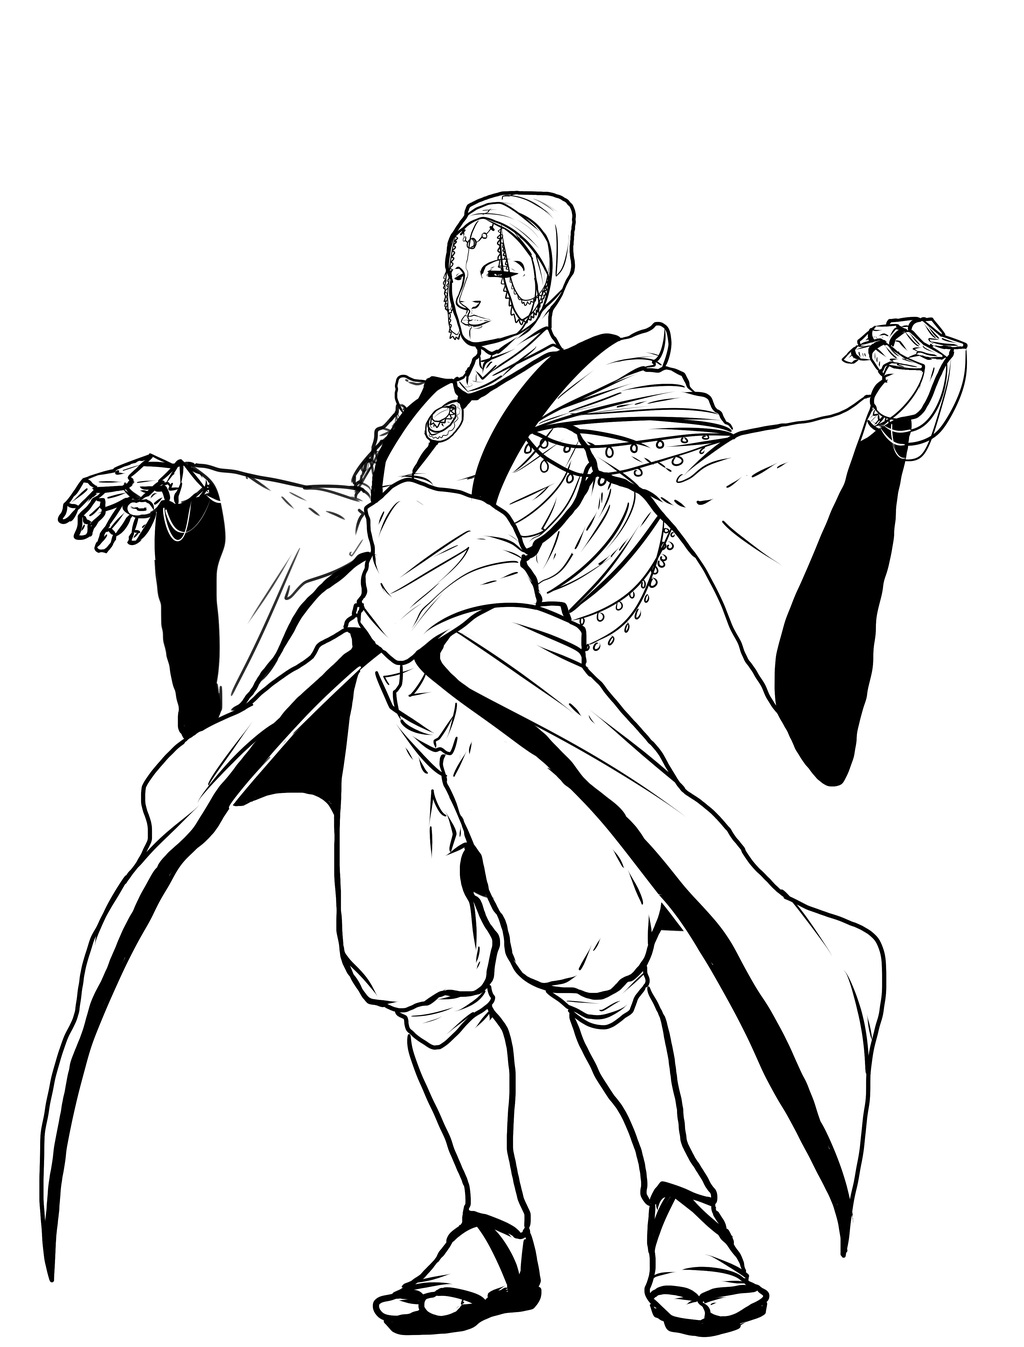 Master of Coin Nadeem- Redesign/lineart 